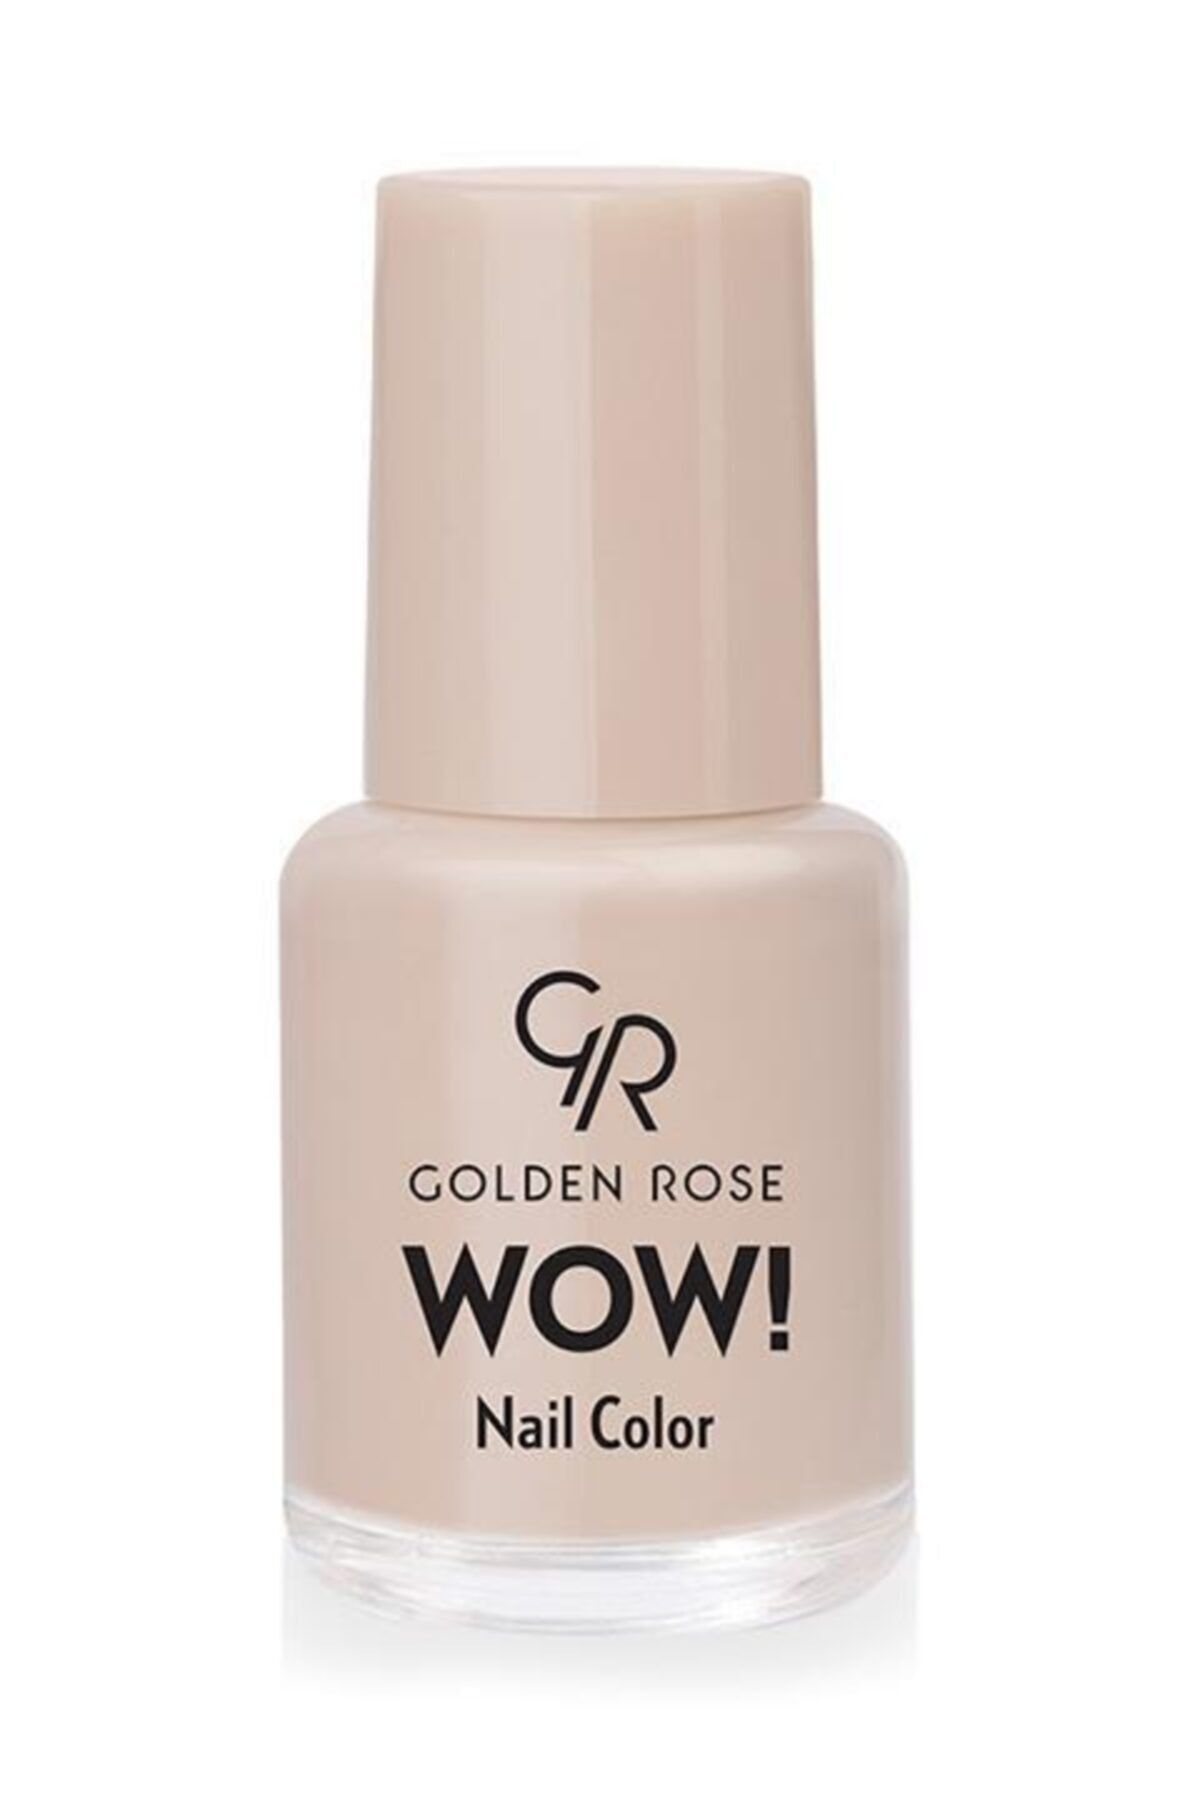 Golden Rose Wow Nail Color - No 05